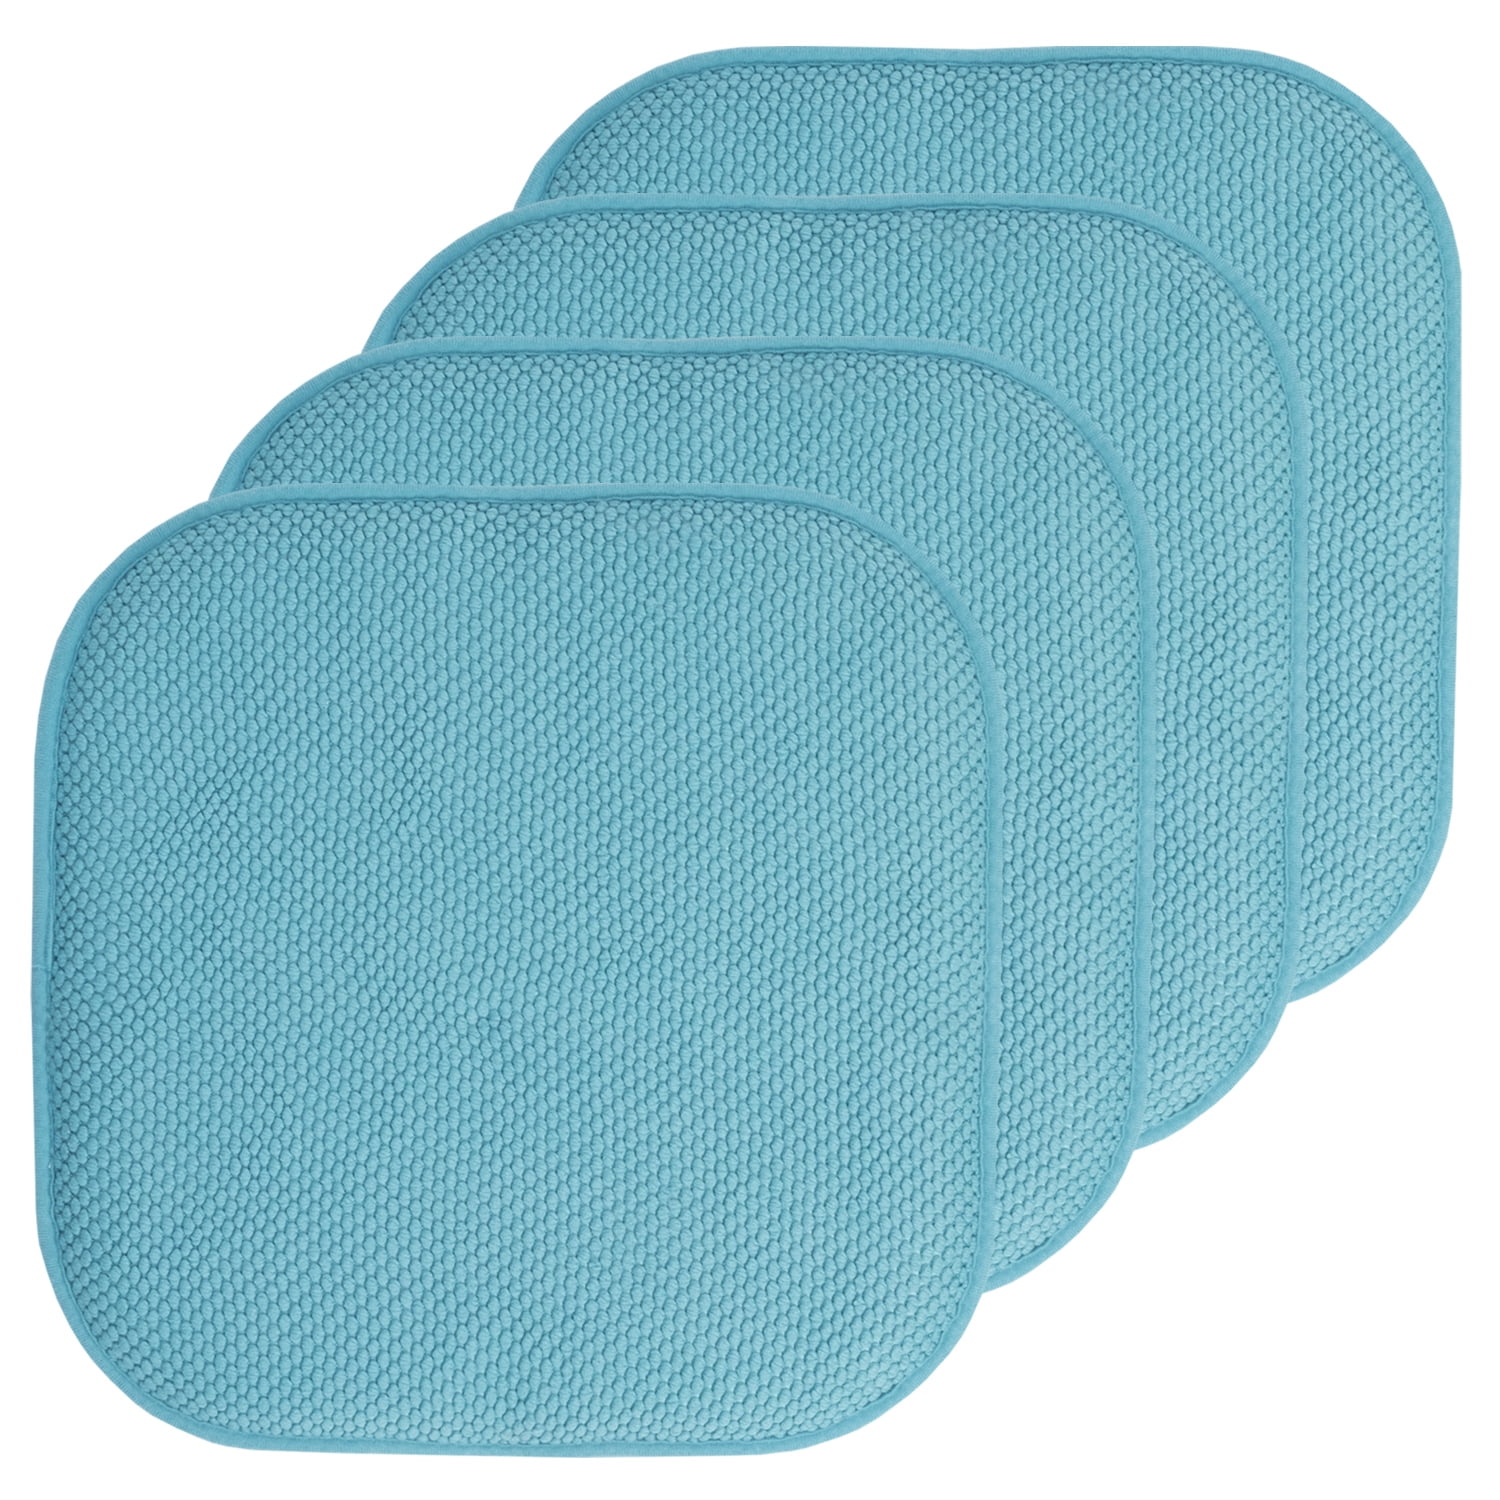 12 Pack 8 4 Details about   Memory Foam Honeycomb Non-Slip Chair/Seat 16" x 16" Cushion Pad 2 